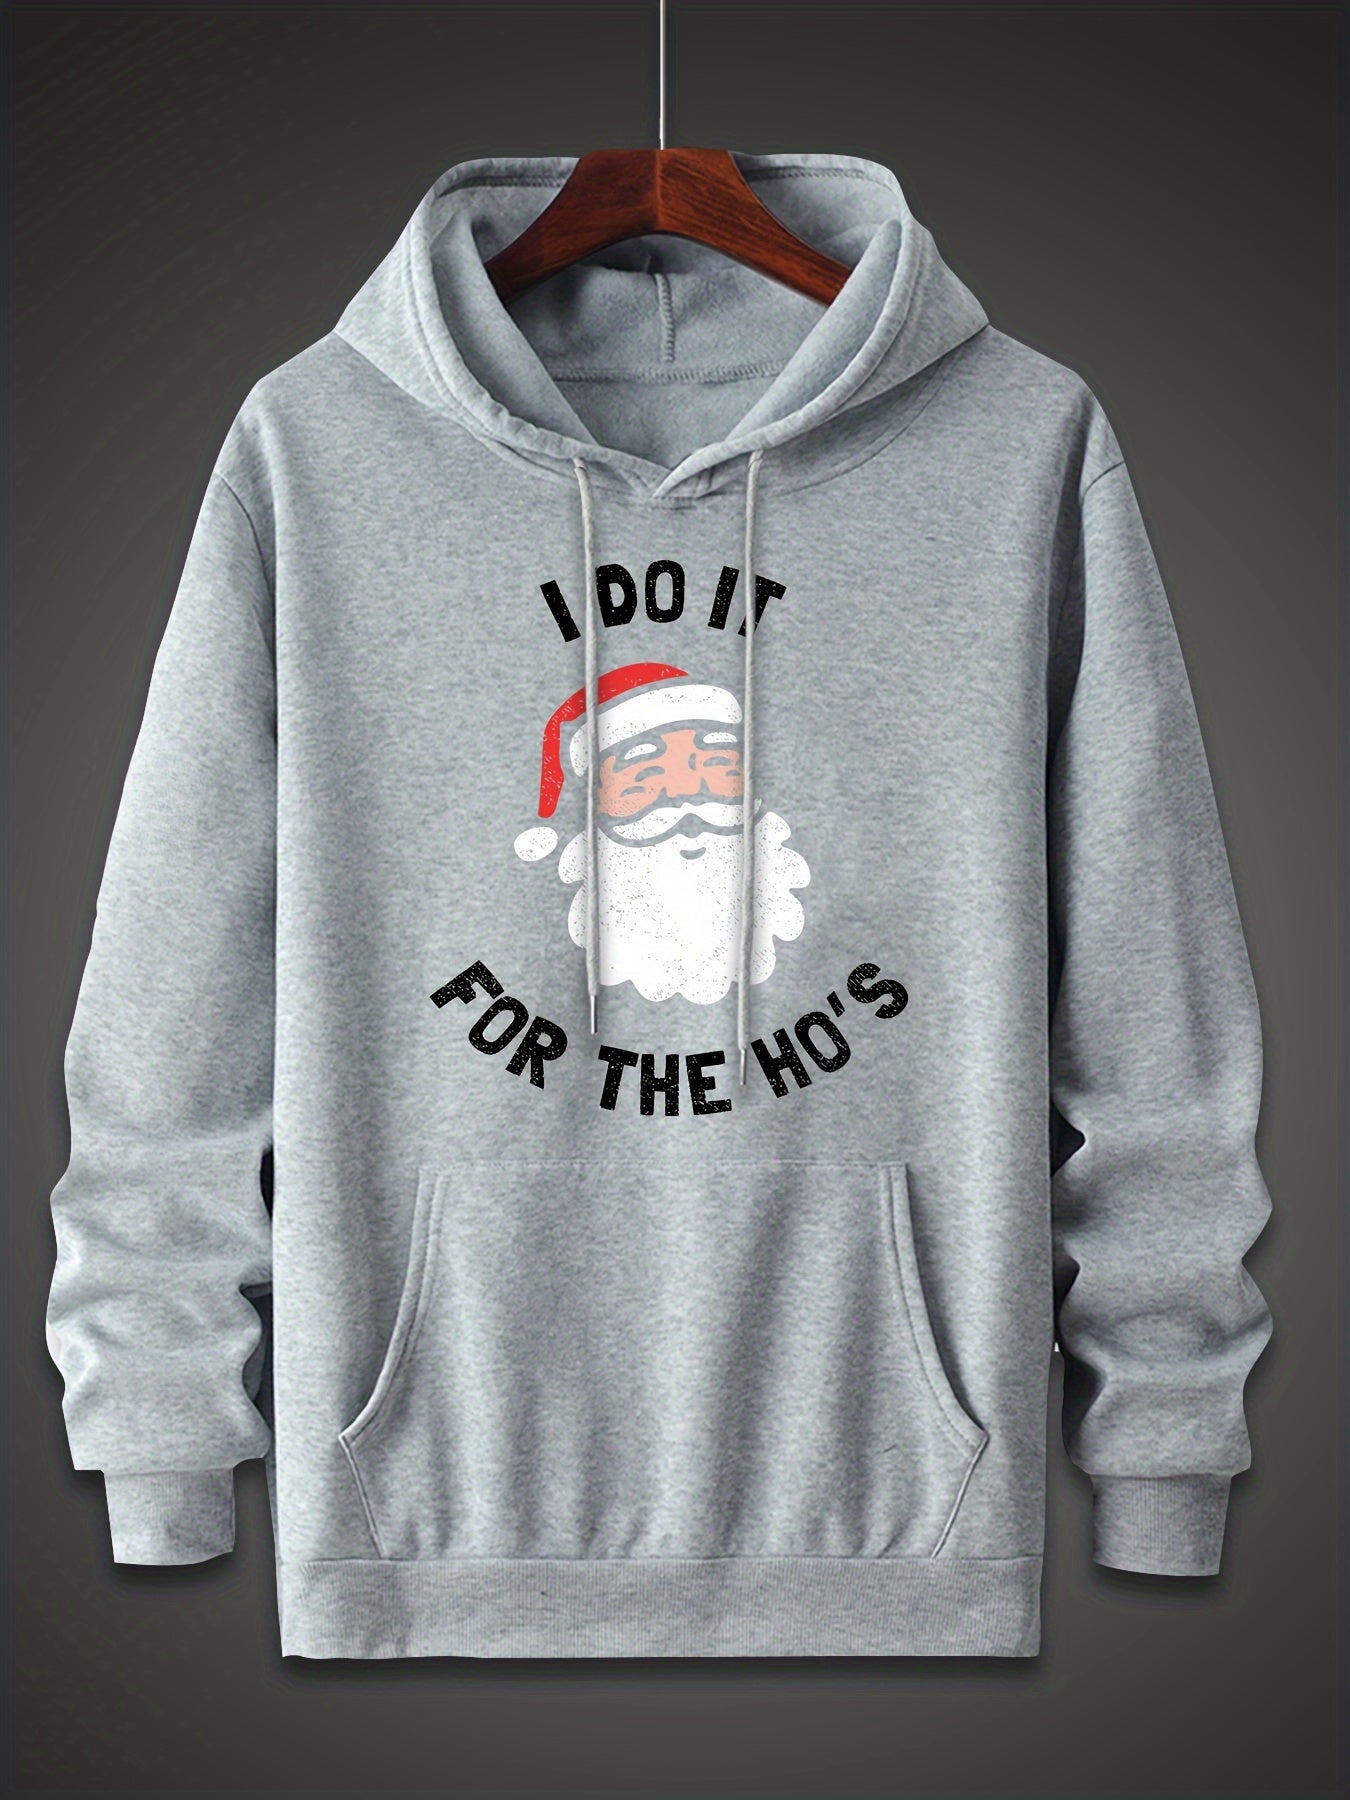 Santa Claus Pattern, Men's Trendy Comfy Hoodie, Casual Slightly Stretch Breathable Hooded Sweatshirt For Outdoor